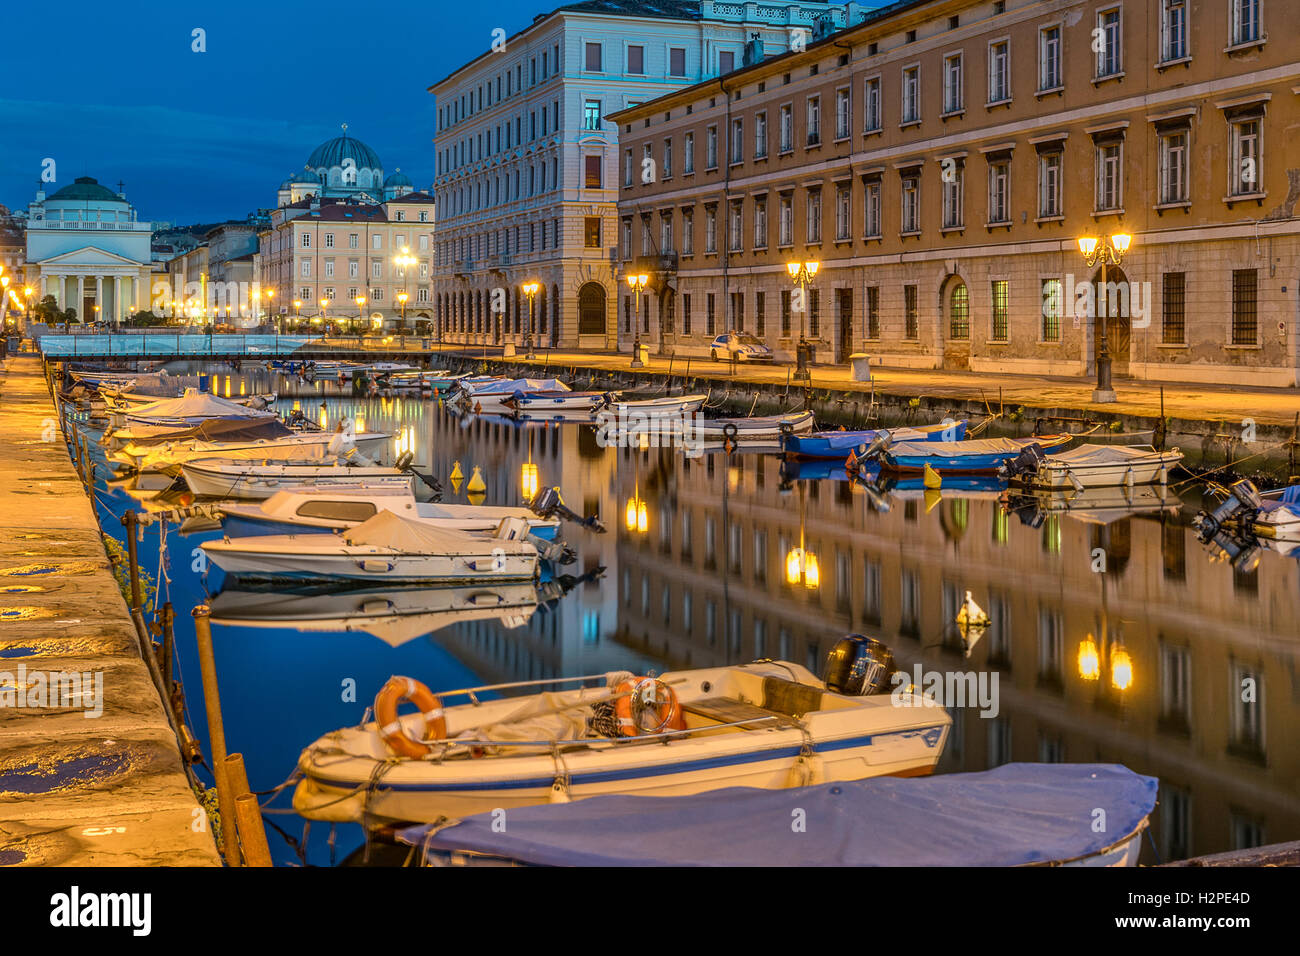 The Grand Canal in Trieste Stock Photo